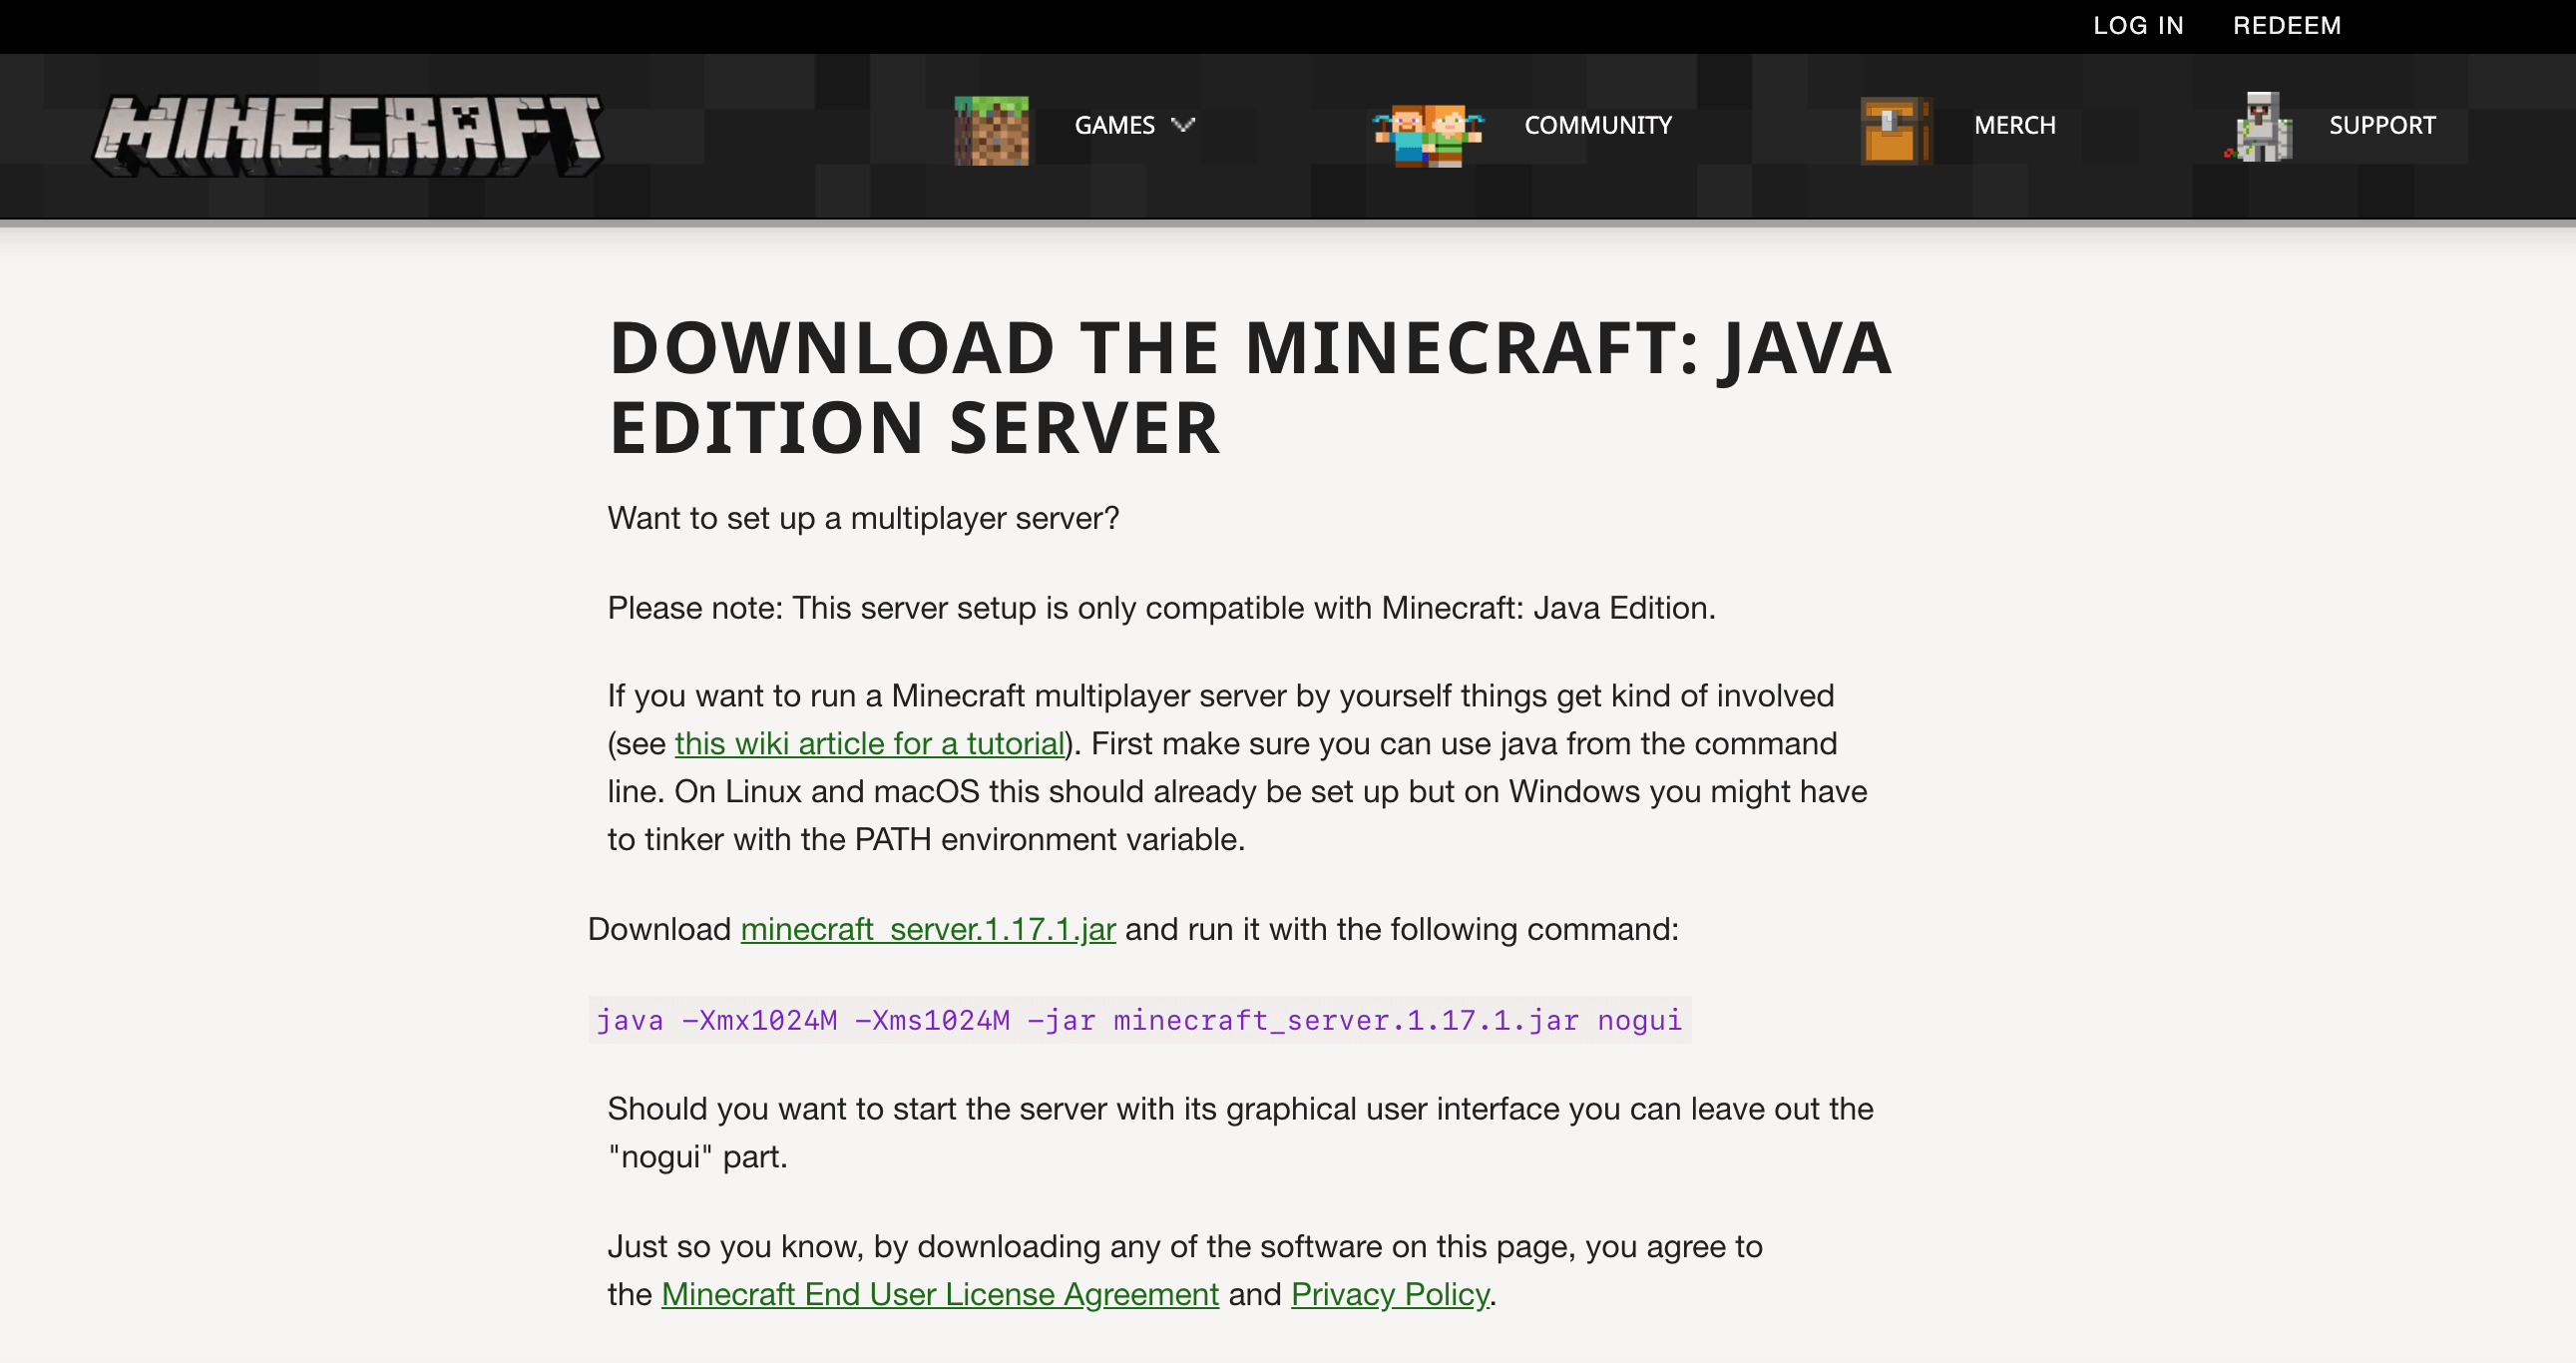 How To Make A Minecraft Server in 1.17.1 